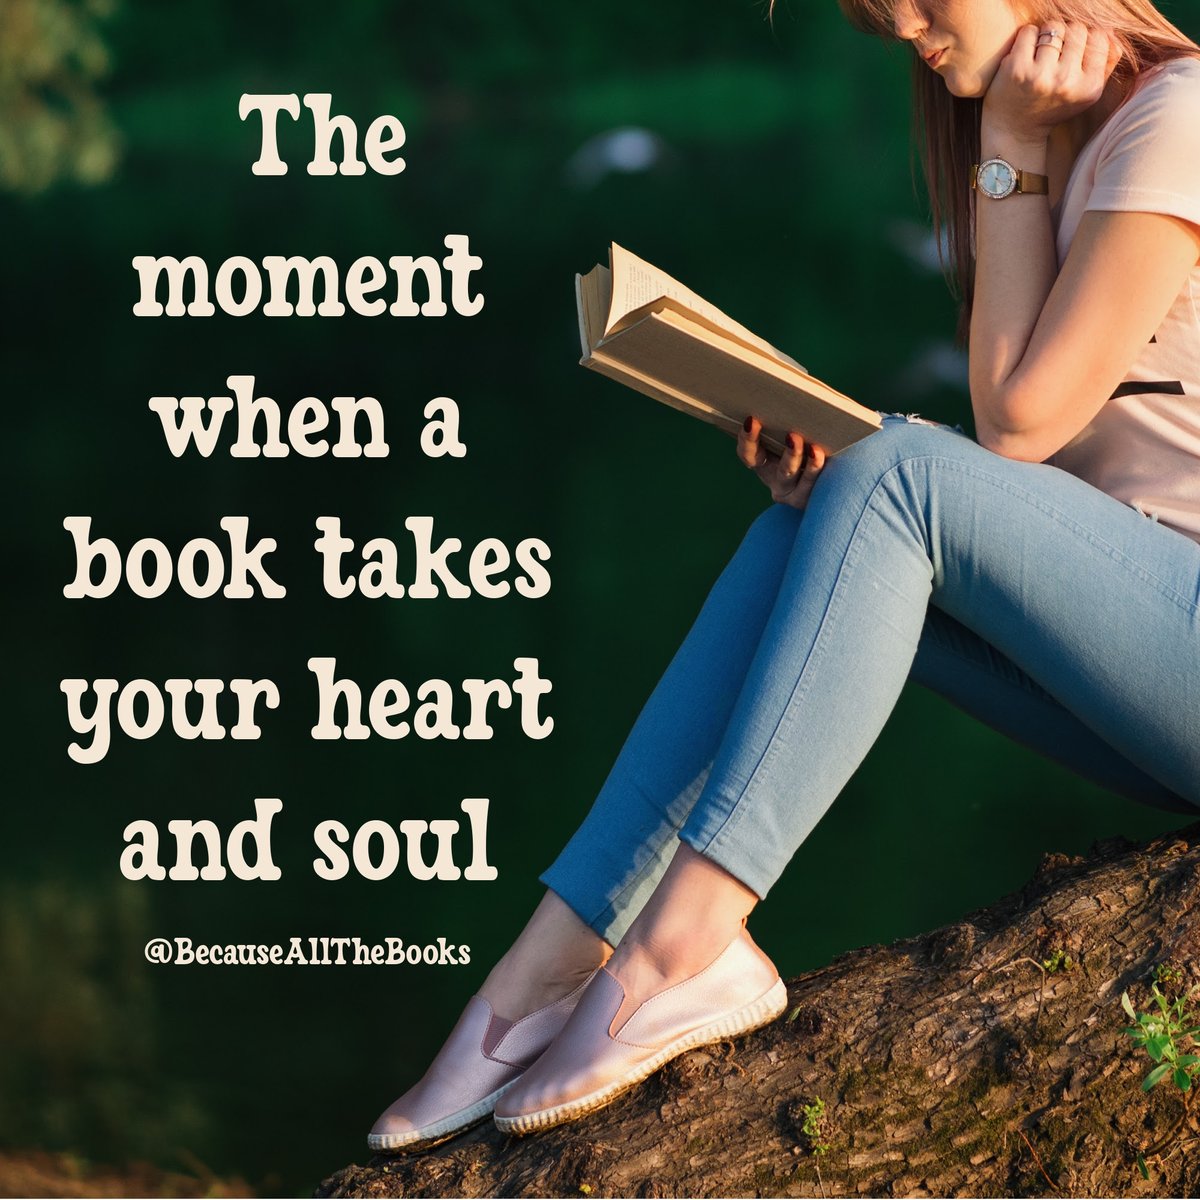 Book lovers know this moment...

#BecauseAllTheBooks #BookVibes #BookFandoms #BooksAreEssential #GiveMeAllTheBooks #BooksBooksAndMoreBooks